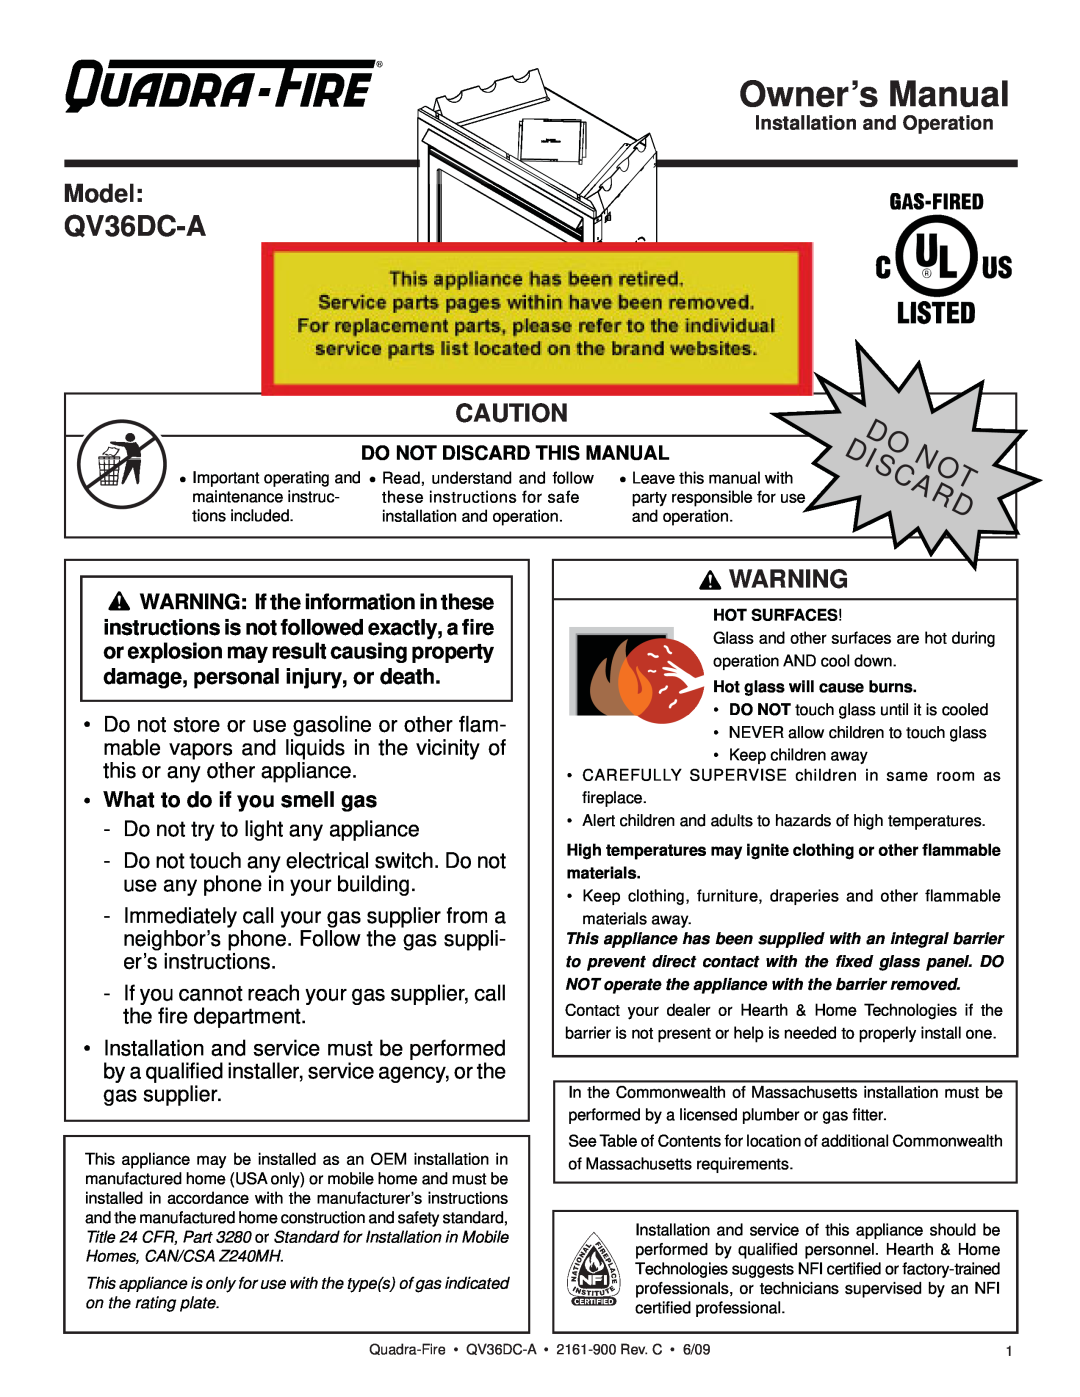 Quadra-Fire QV36DC-A owner manual Model, What to do if you smell gas 